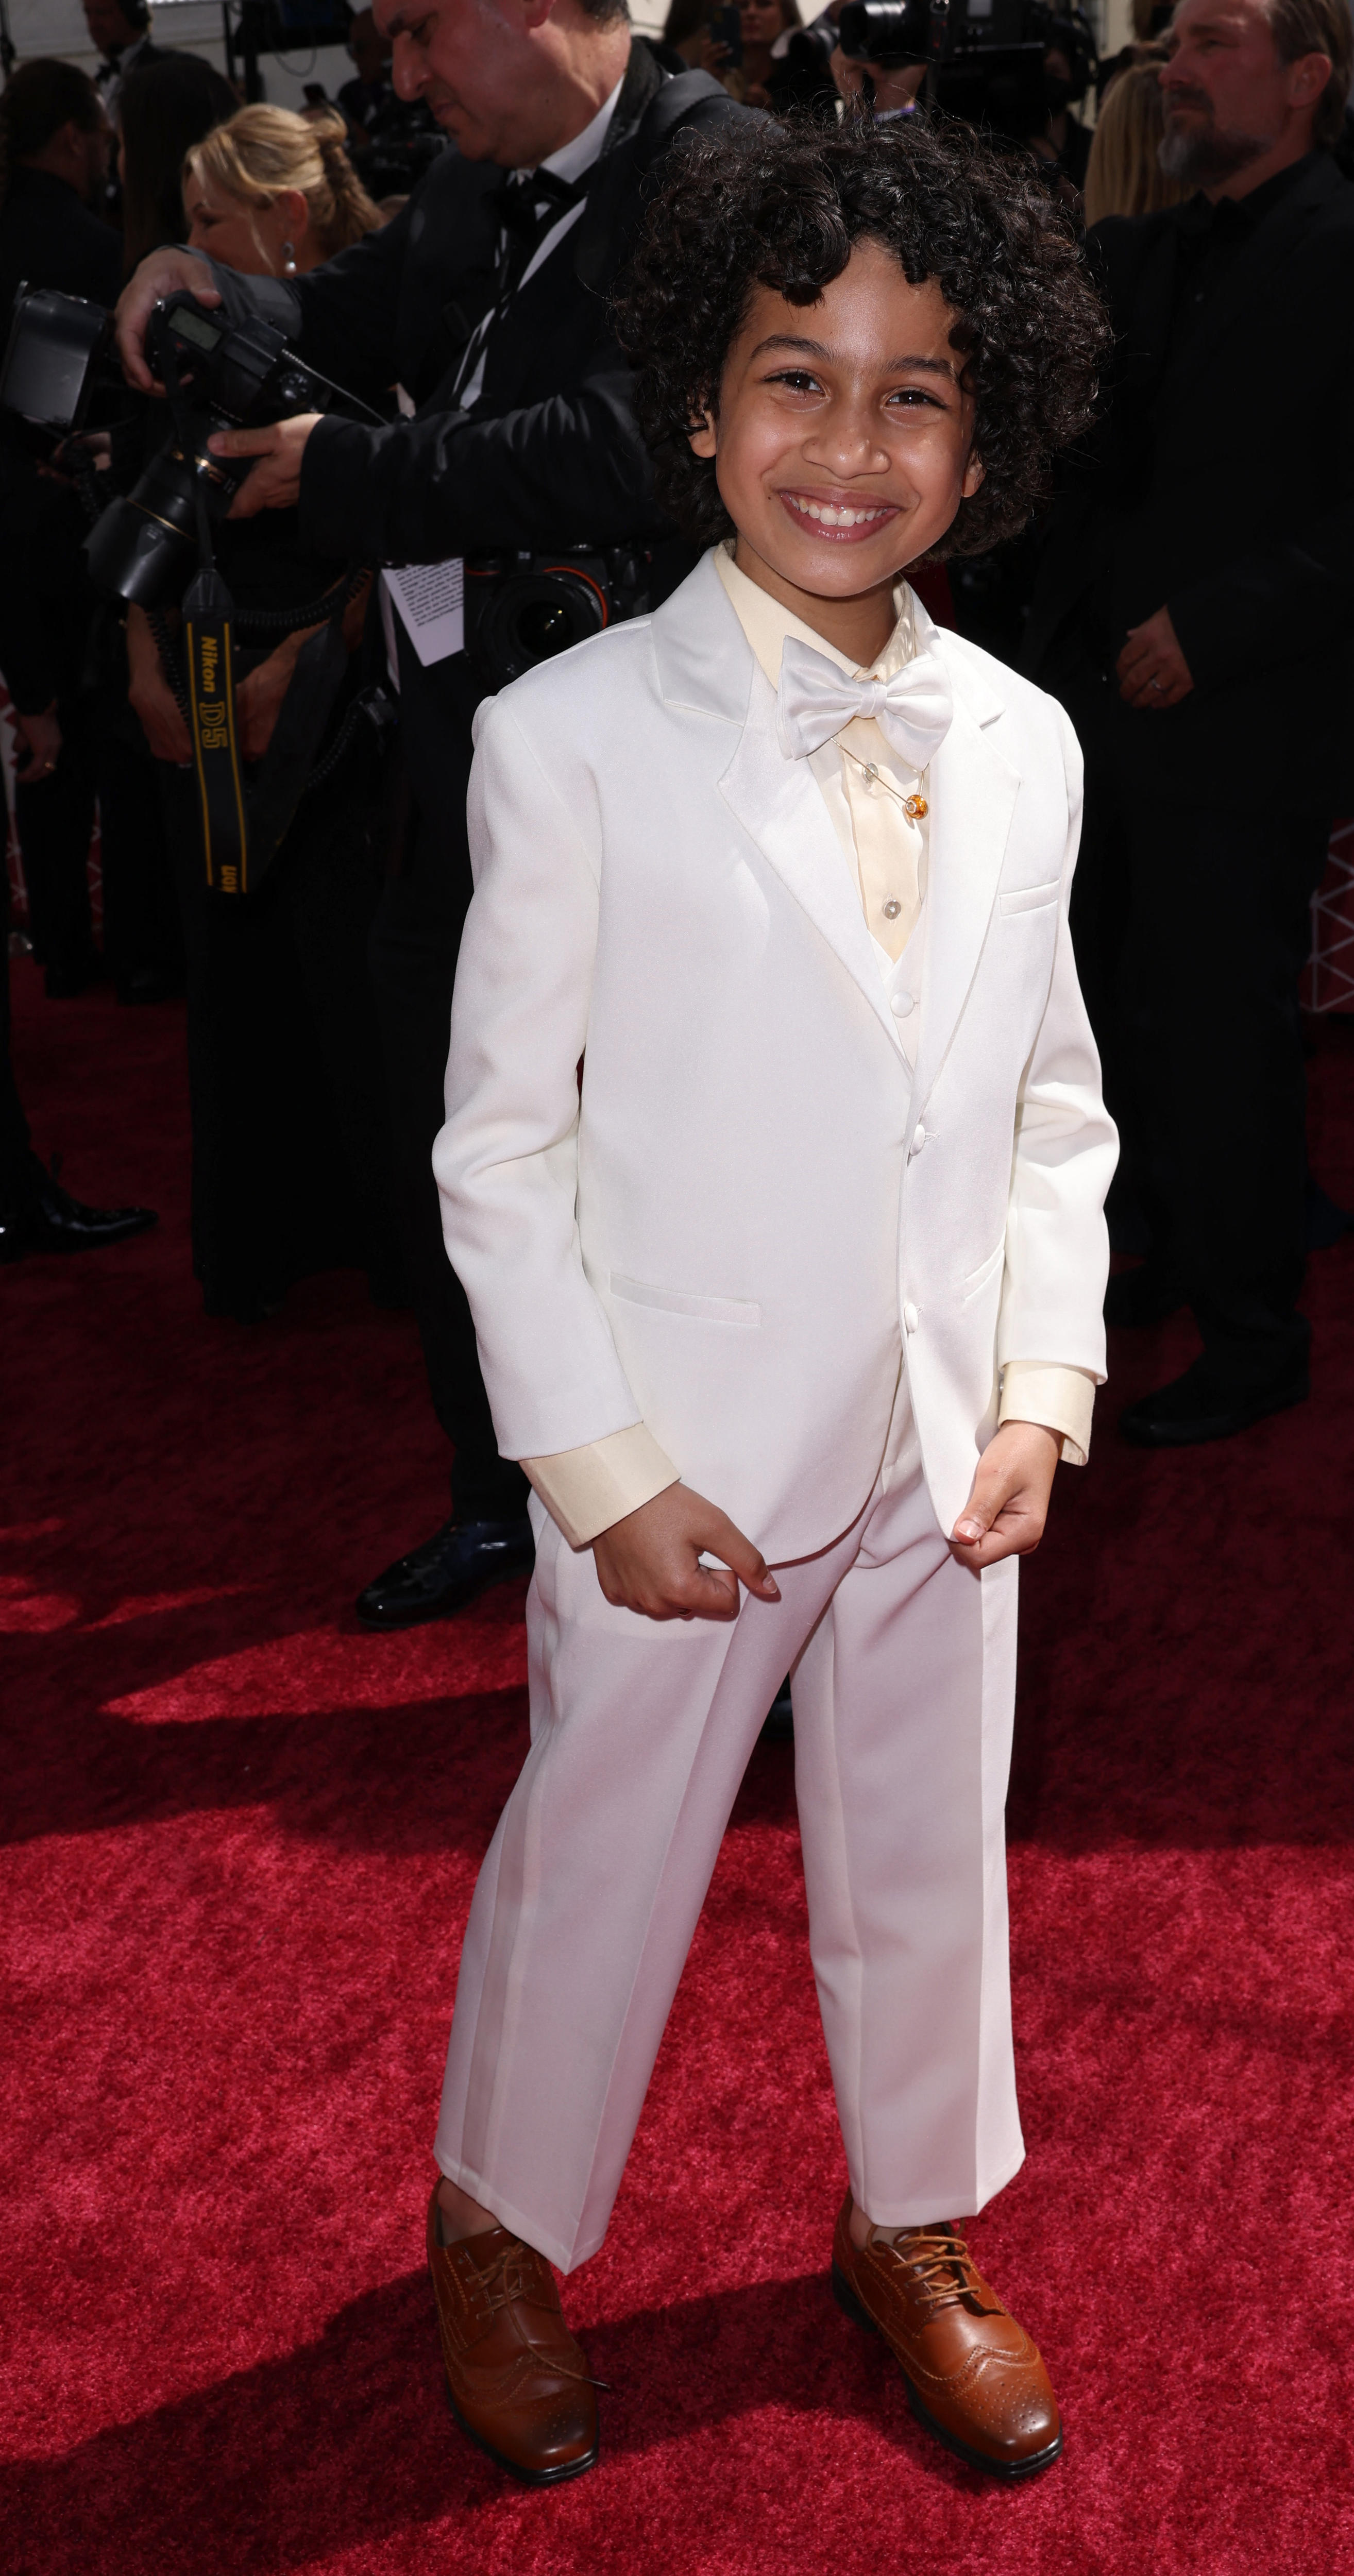 Child actor Ravi Cabot-Conyers smiles on the Oscars red carpet wearing a white suit with bow tie.